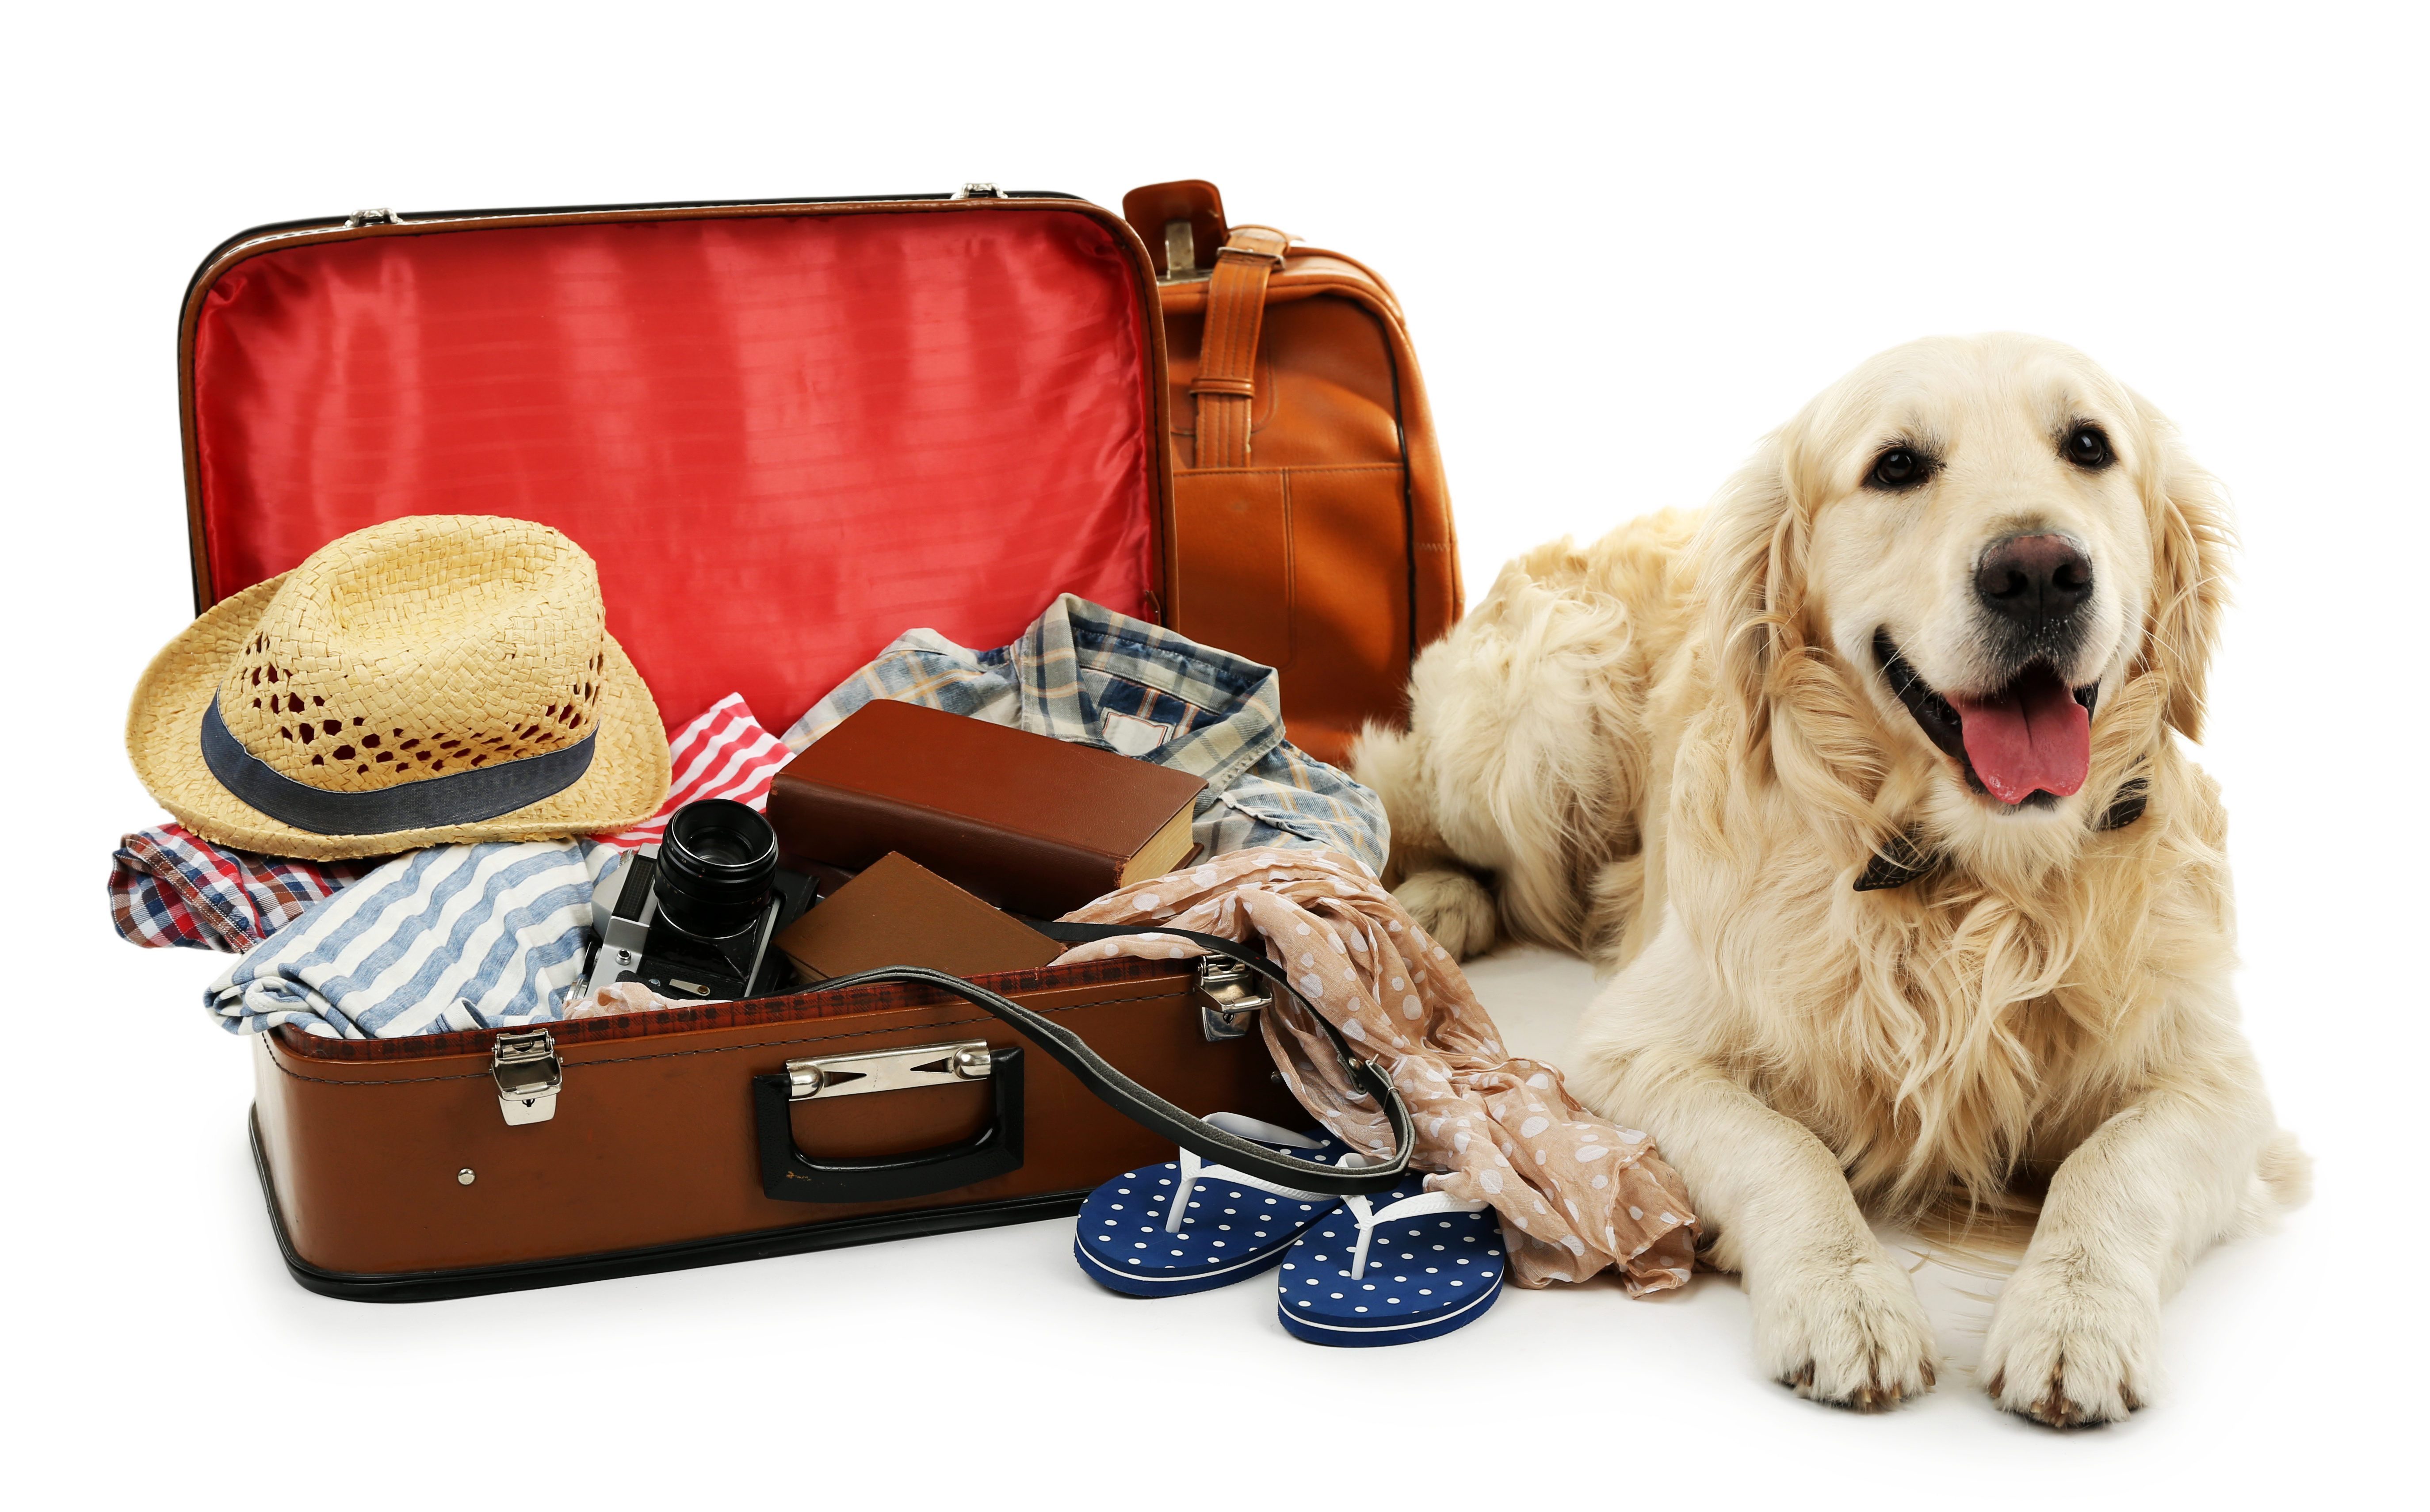 Traveling with Pets